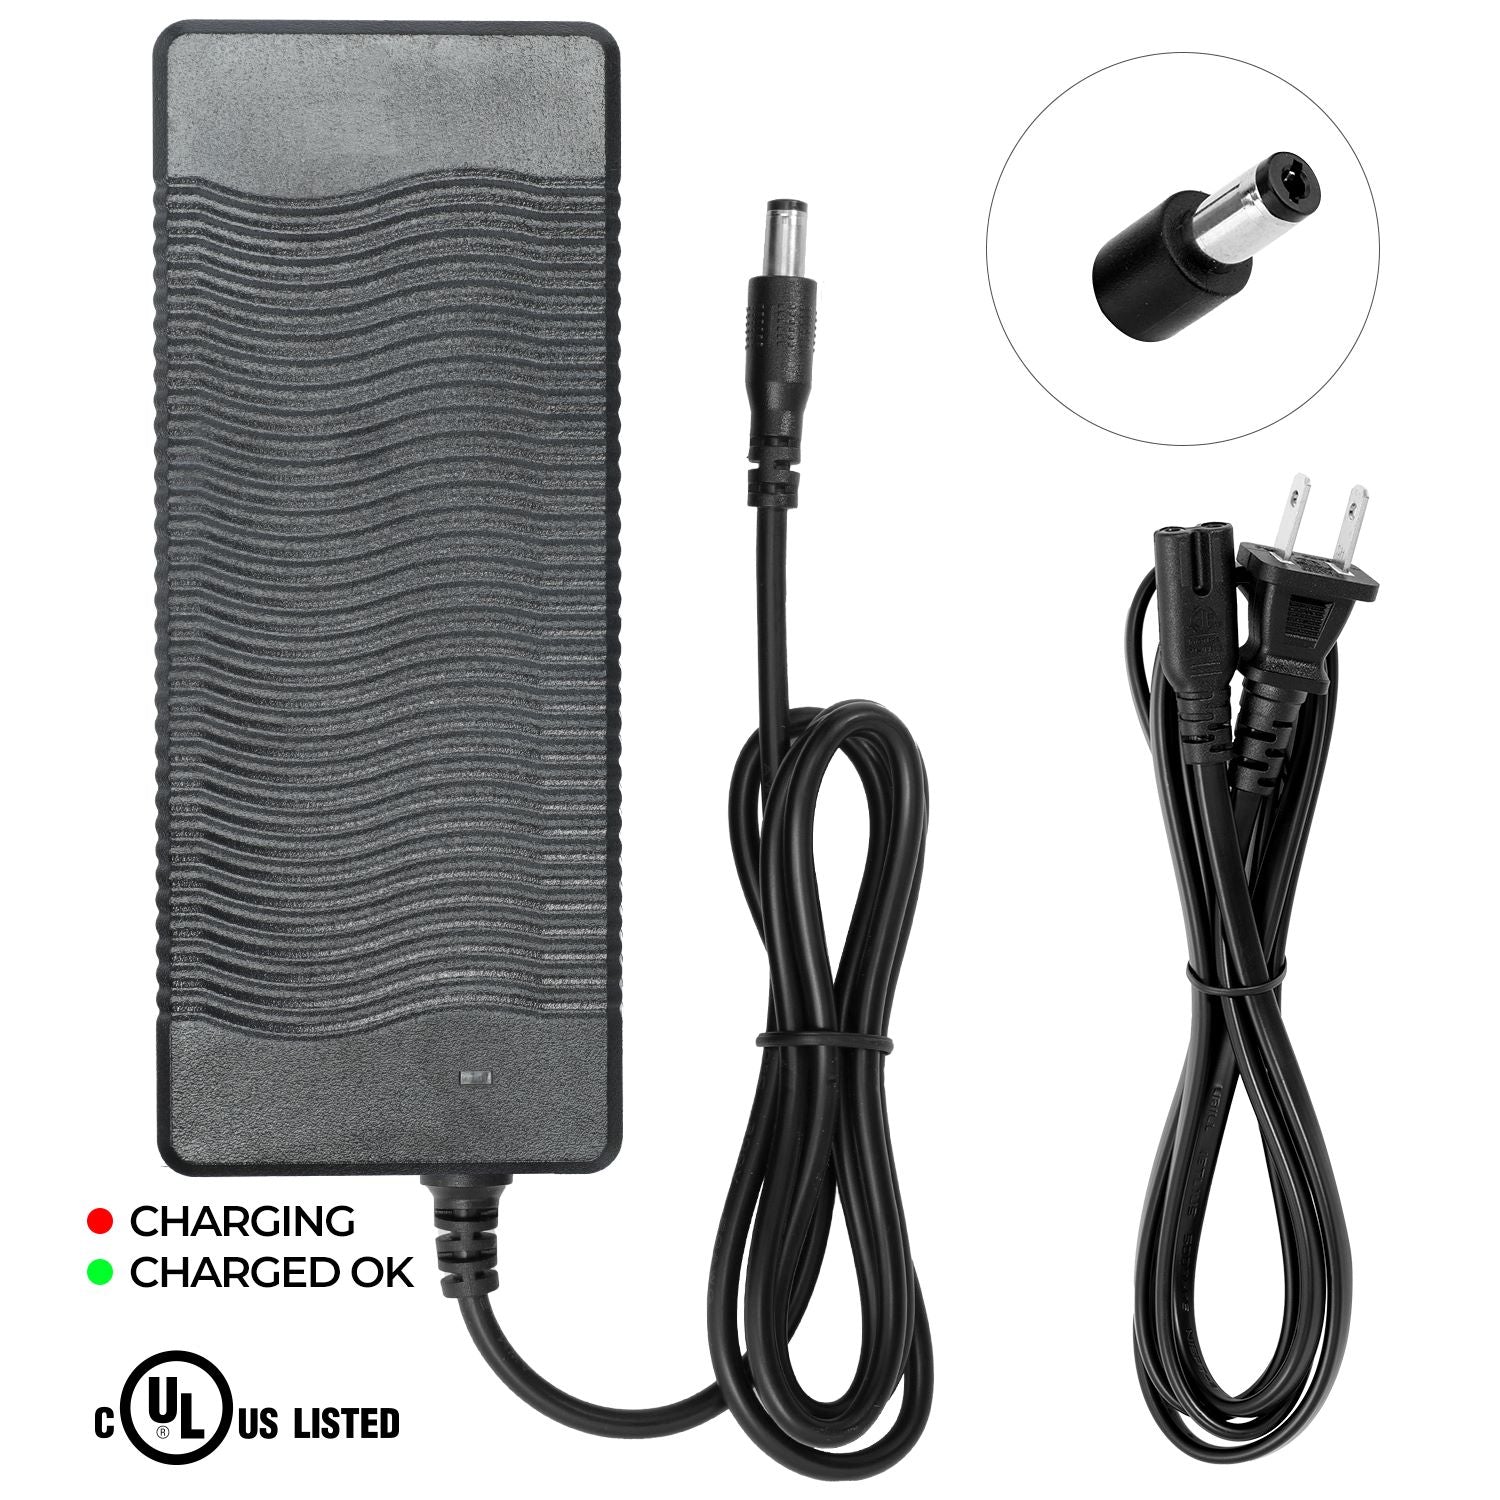 Charger for iGO Electric Discovery Series Electric Bike